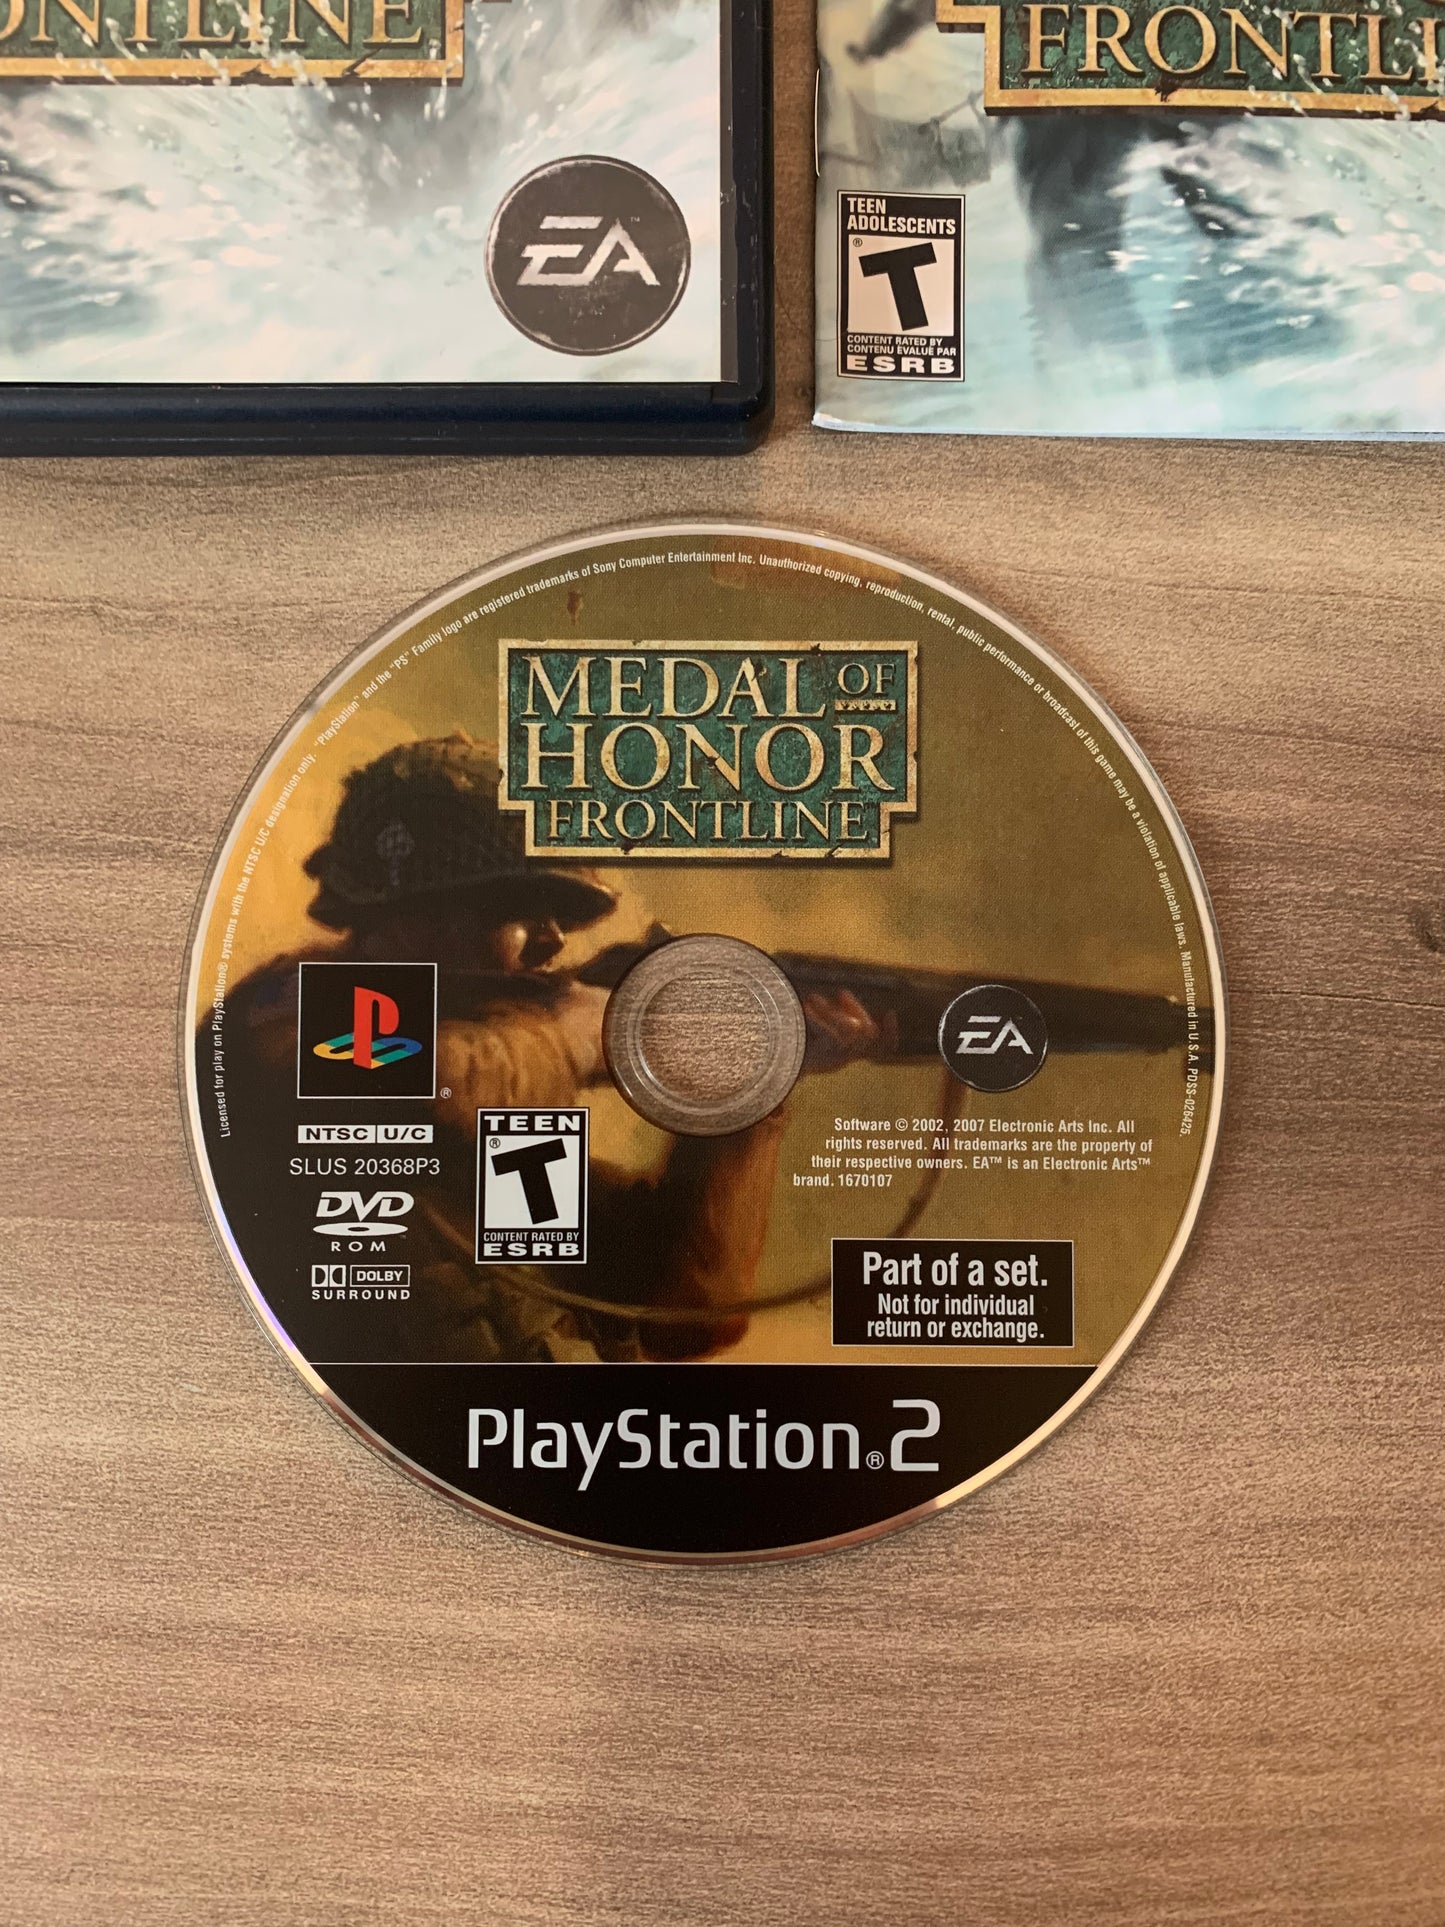 SONY PLAYSTATiON 2 [PS2] | MEDAL OF HONOR FRONTLiNE